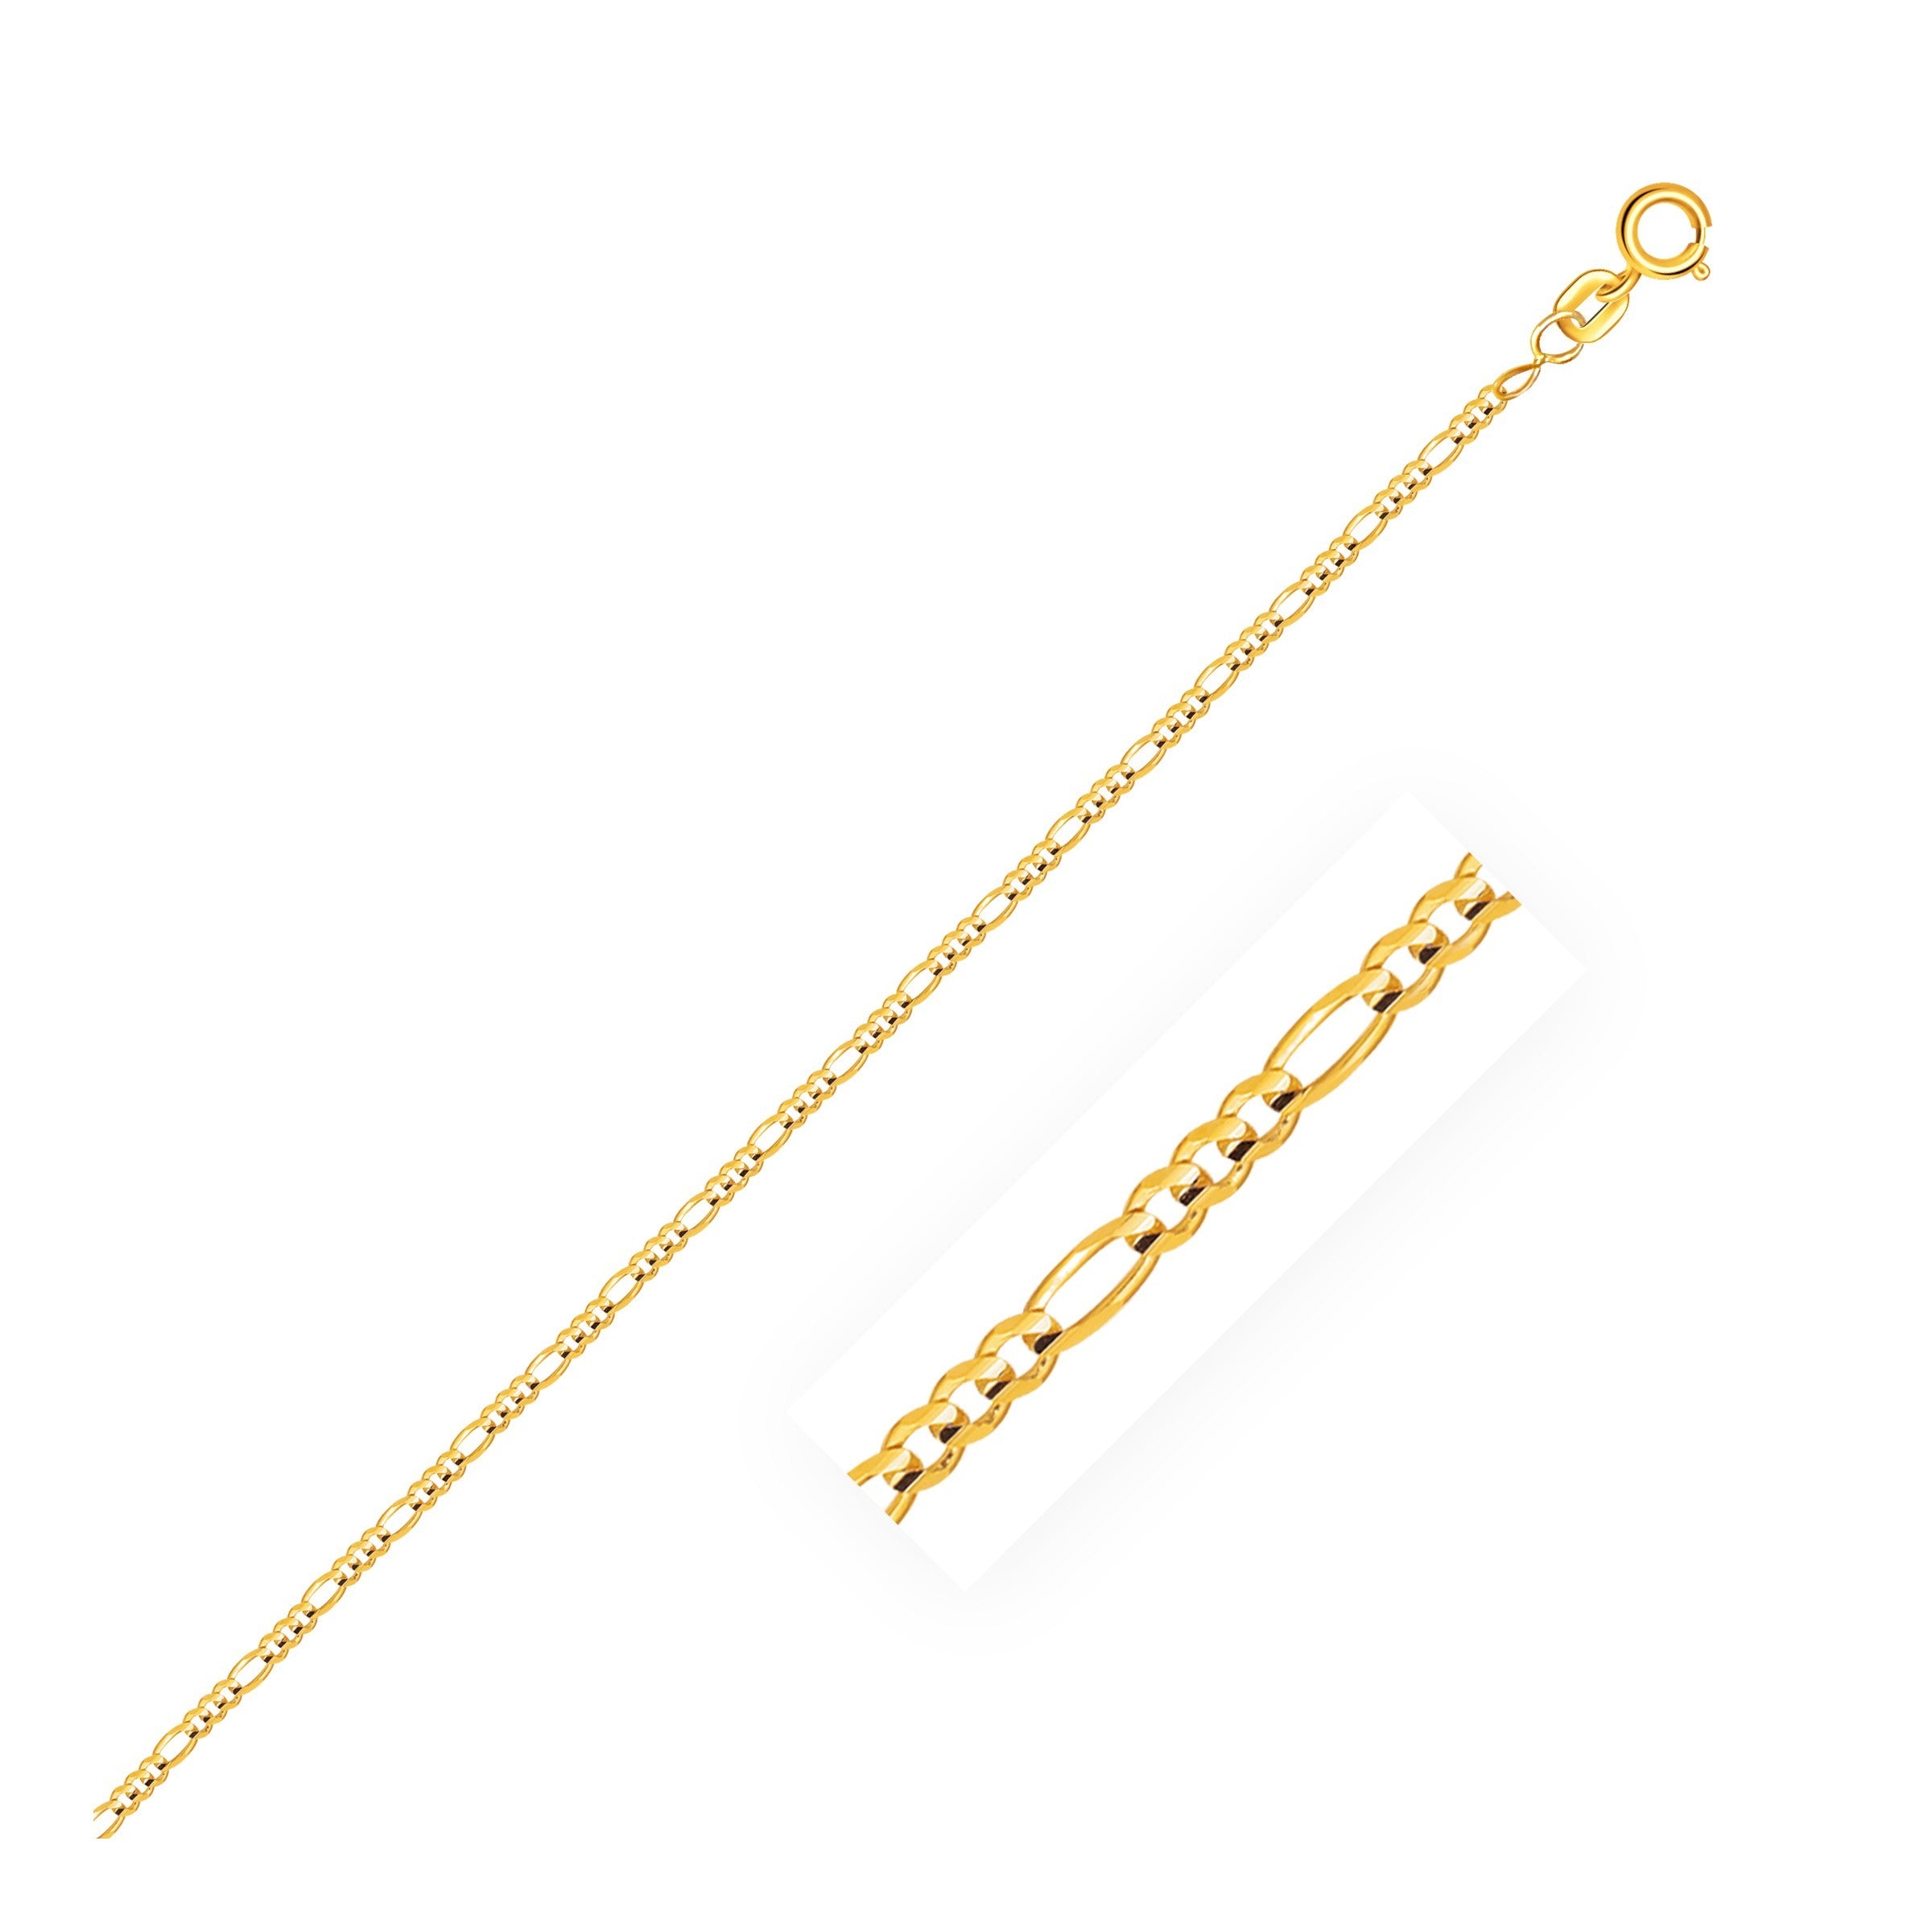 14k Yellow Gold Figaro Anklet 1.3mm, size 10''